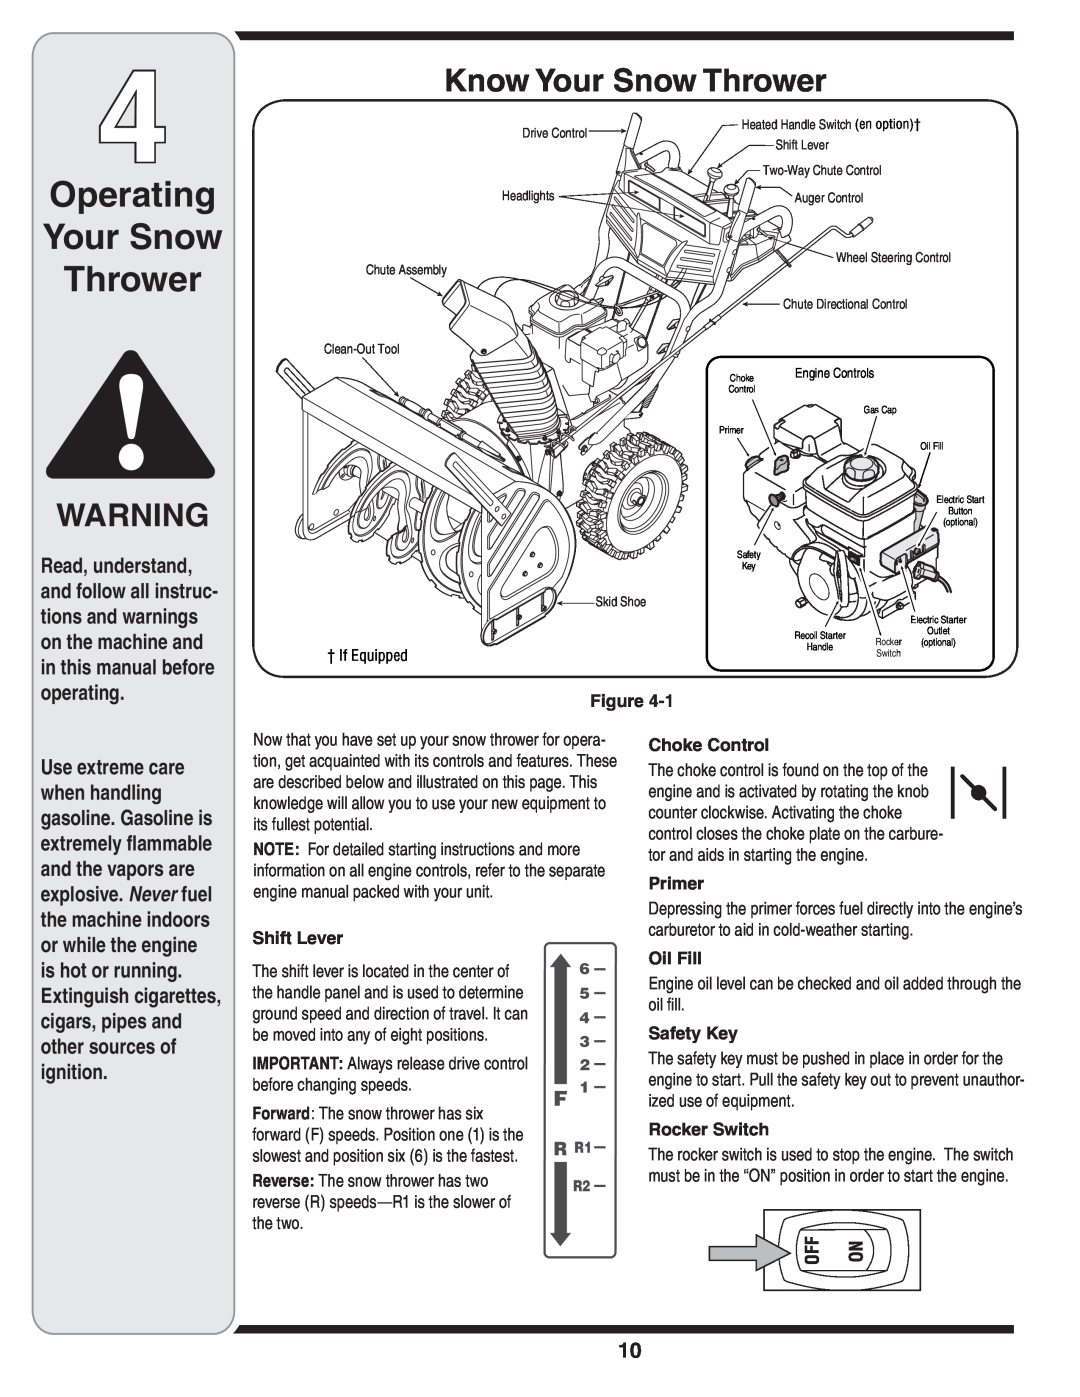 Cub Cadet OEM-390-679 Operating Your Snow Thrower, Know Your Snow Thrower, R R1, Shift Lever, before changing speeds 